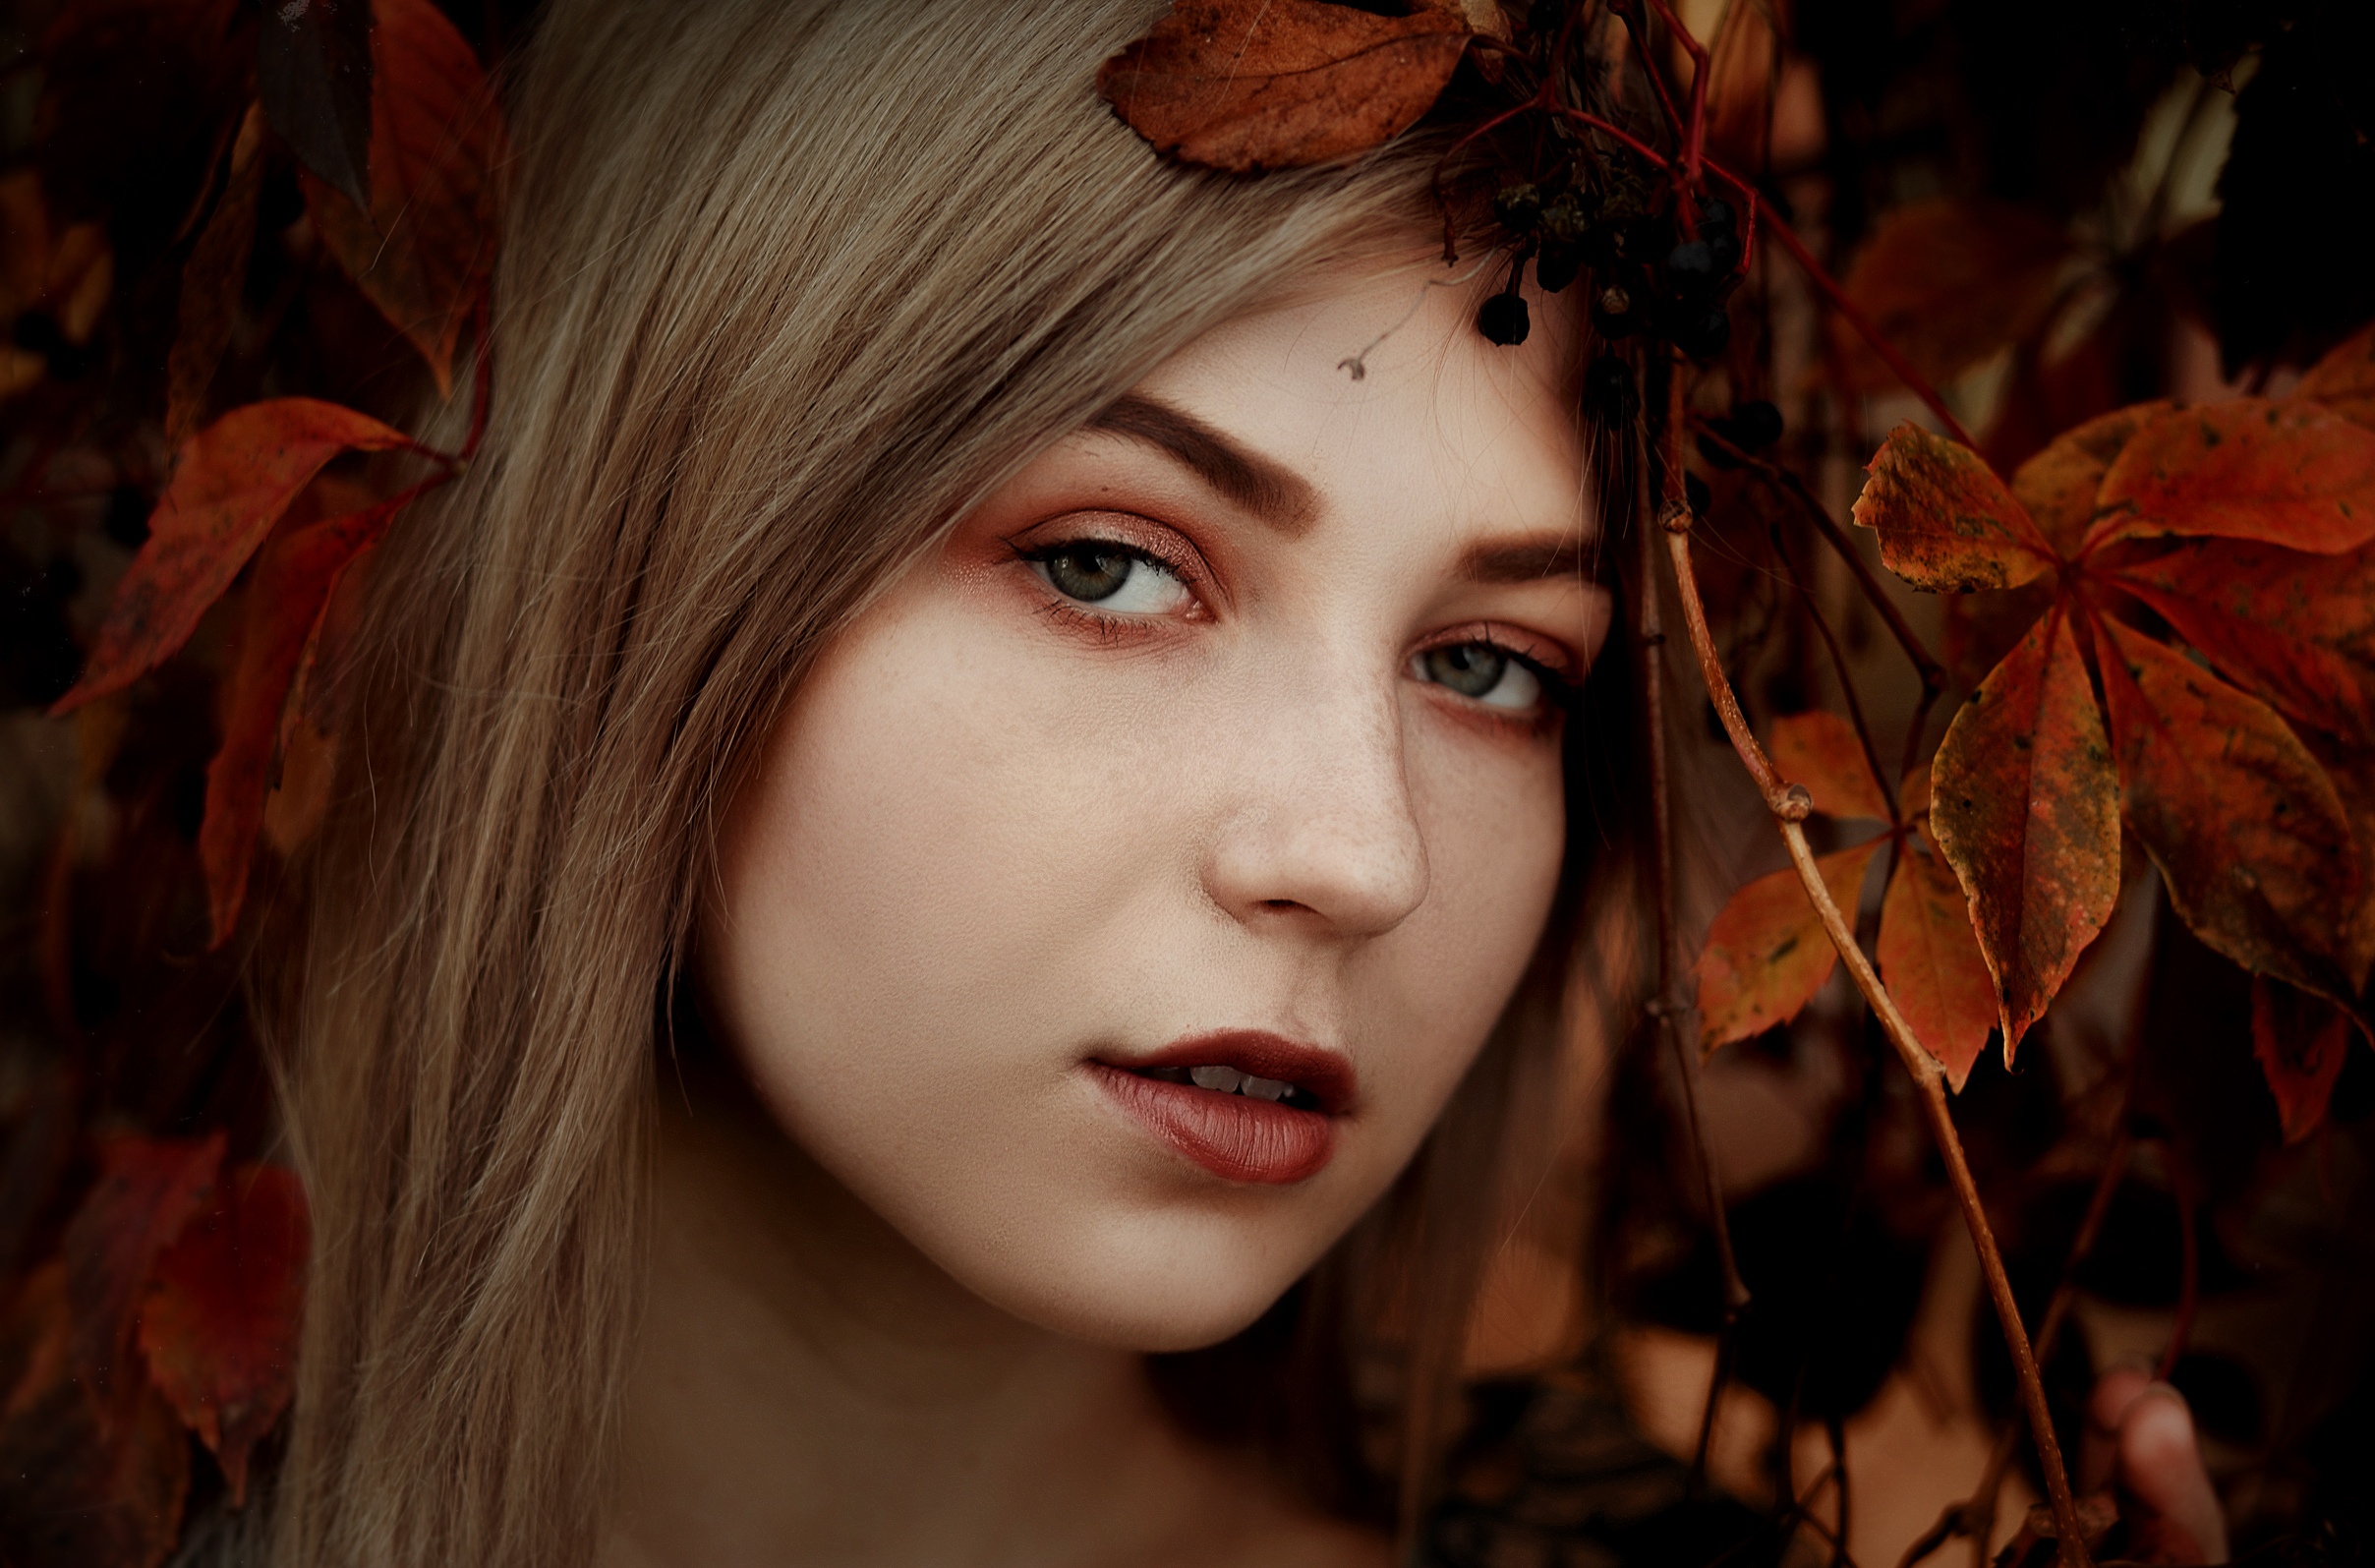 Women Model Face Closeup Looking At Viewer Leaves Fall Parted Lips Portrait 2416x1595